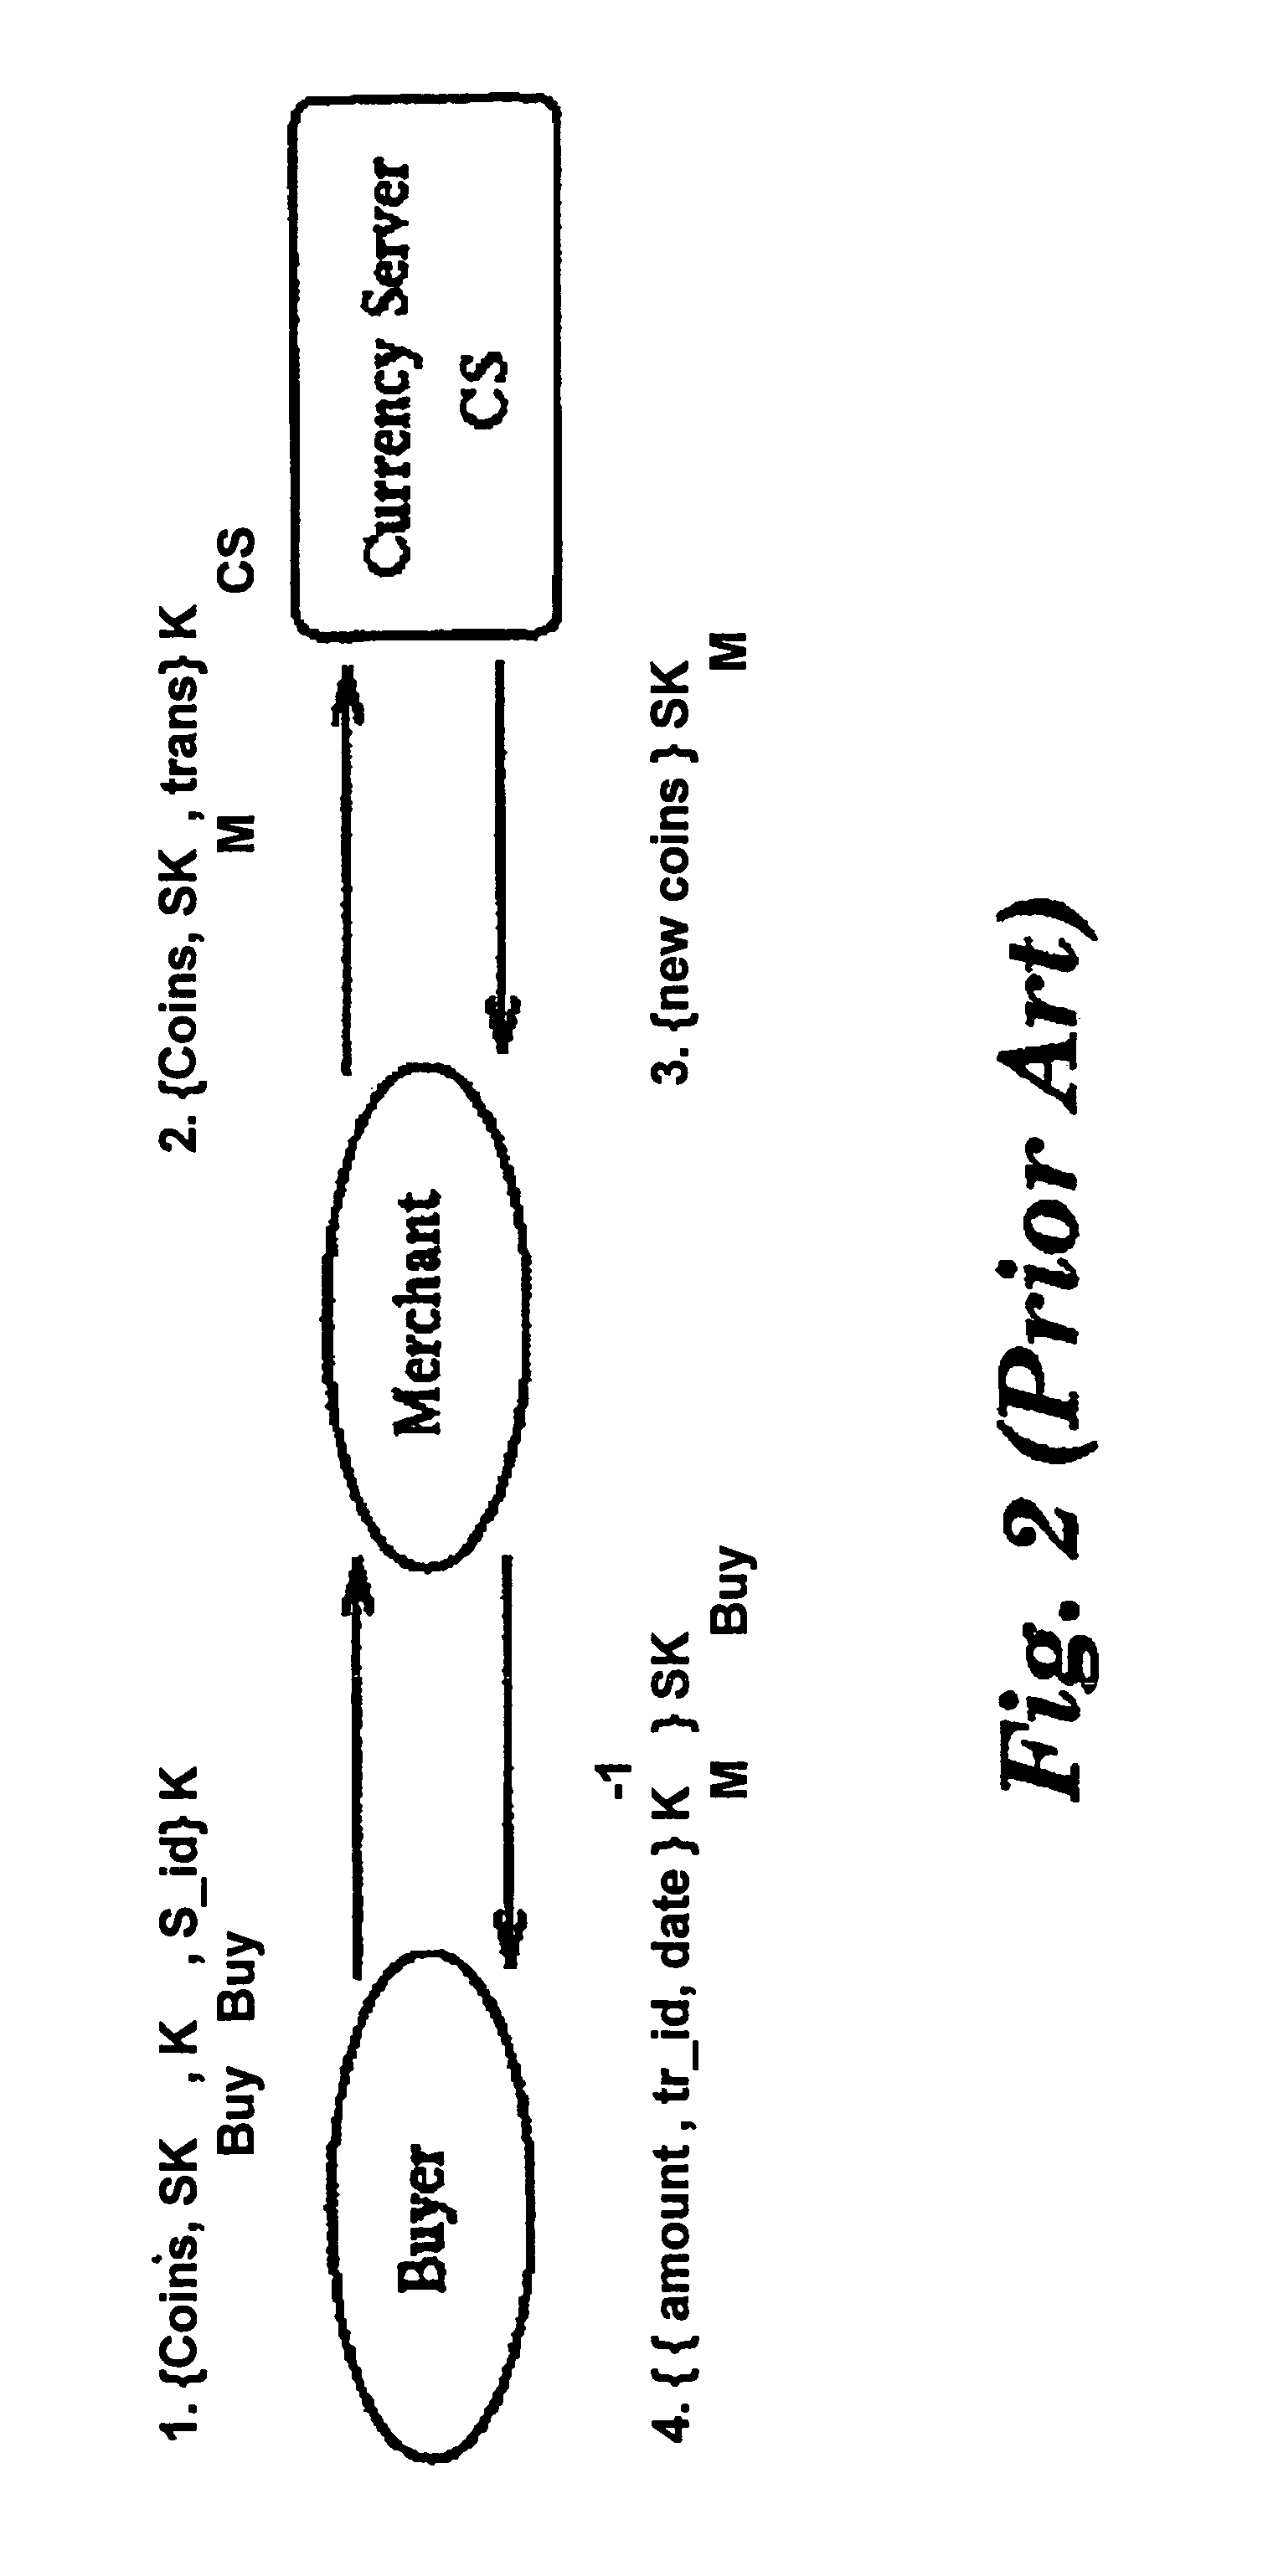 Electronic currency, electronic wallet therefor and electronic payment systems employing them